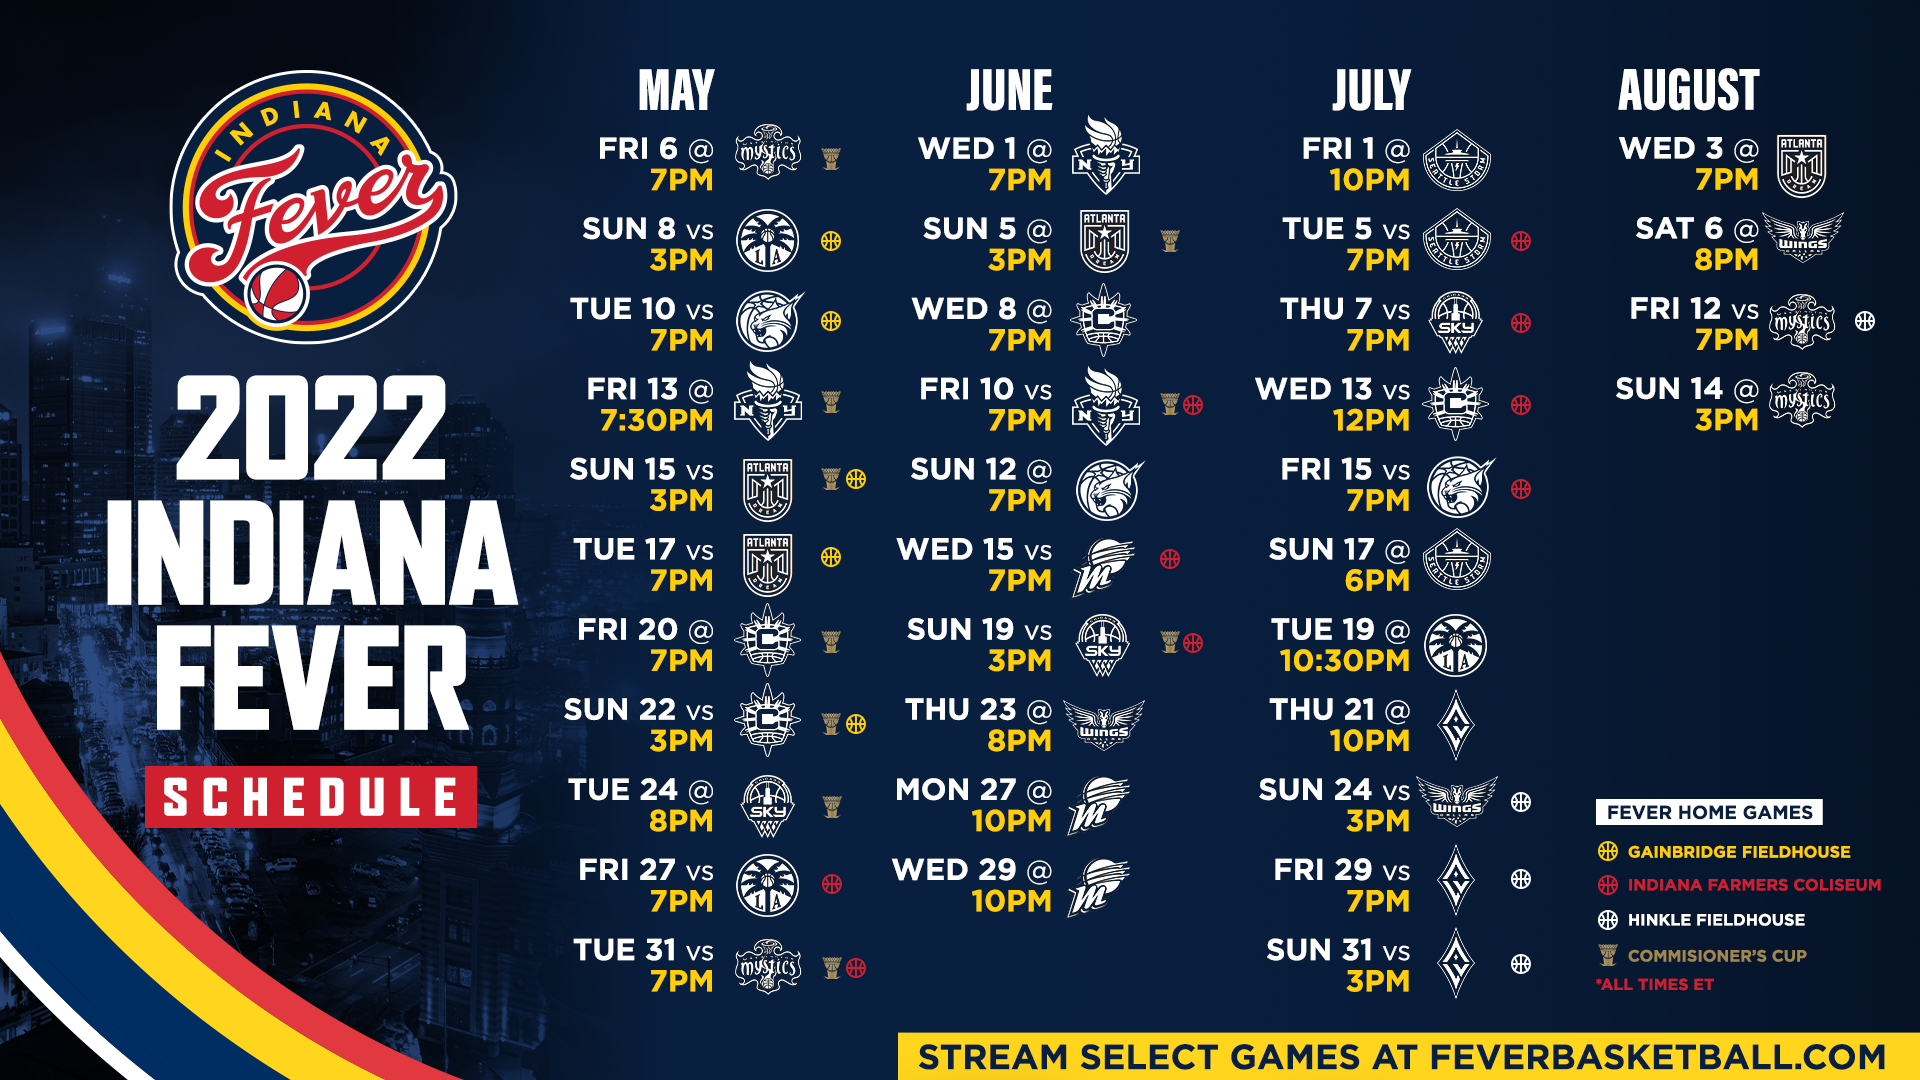 Indiana Fever Schedule 2022 Takeaways From The 2022 Indiana Fever Schedule - The Next